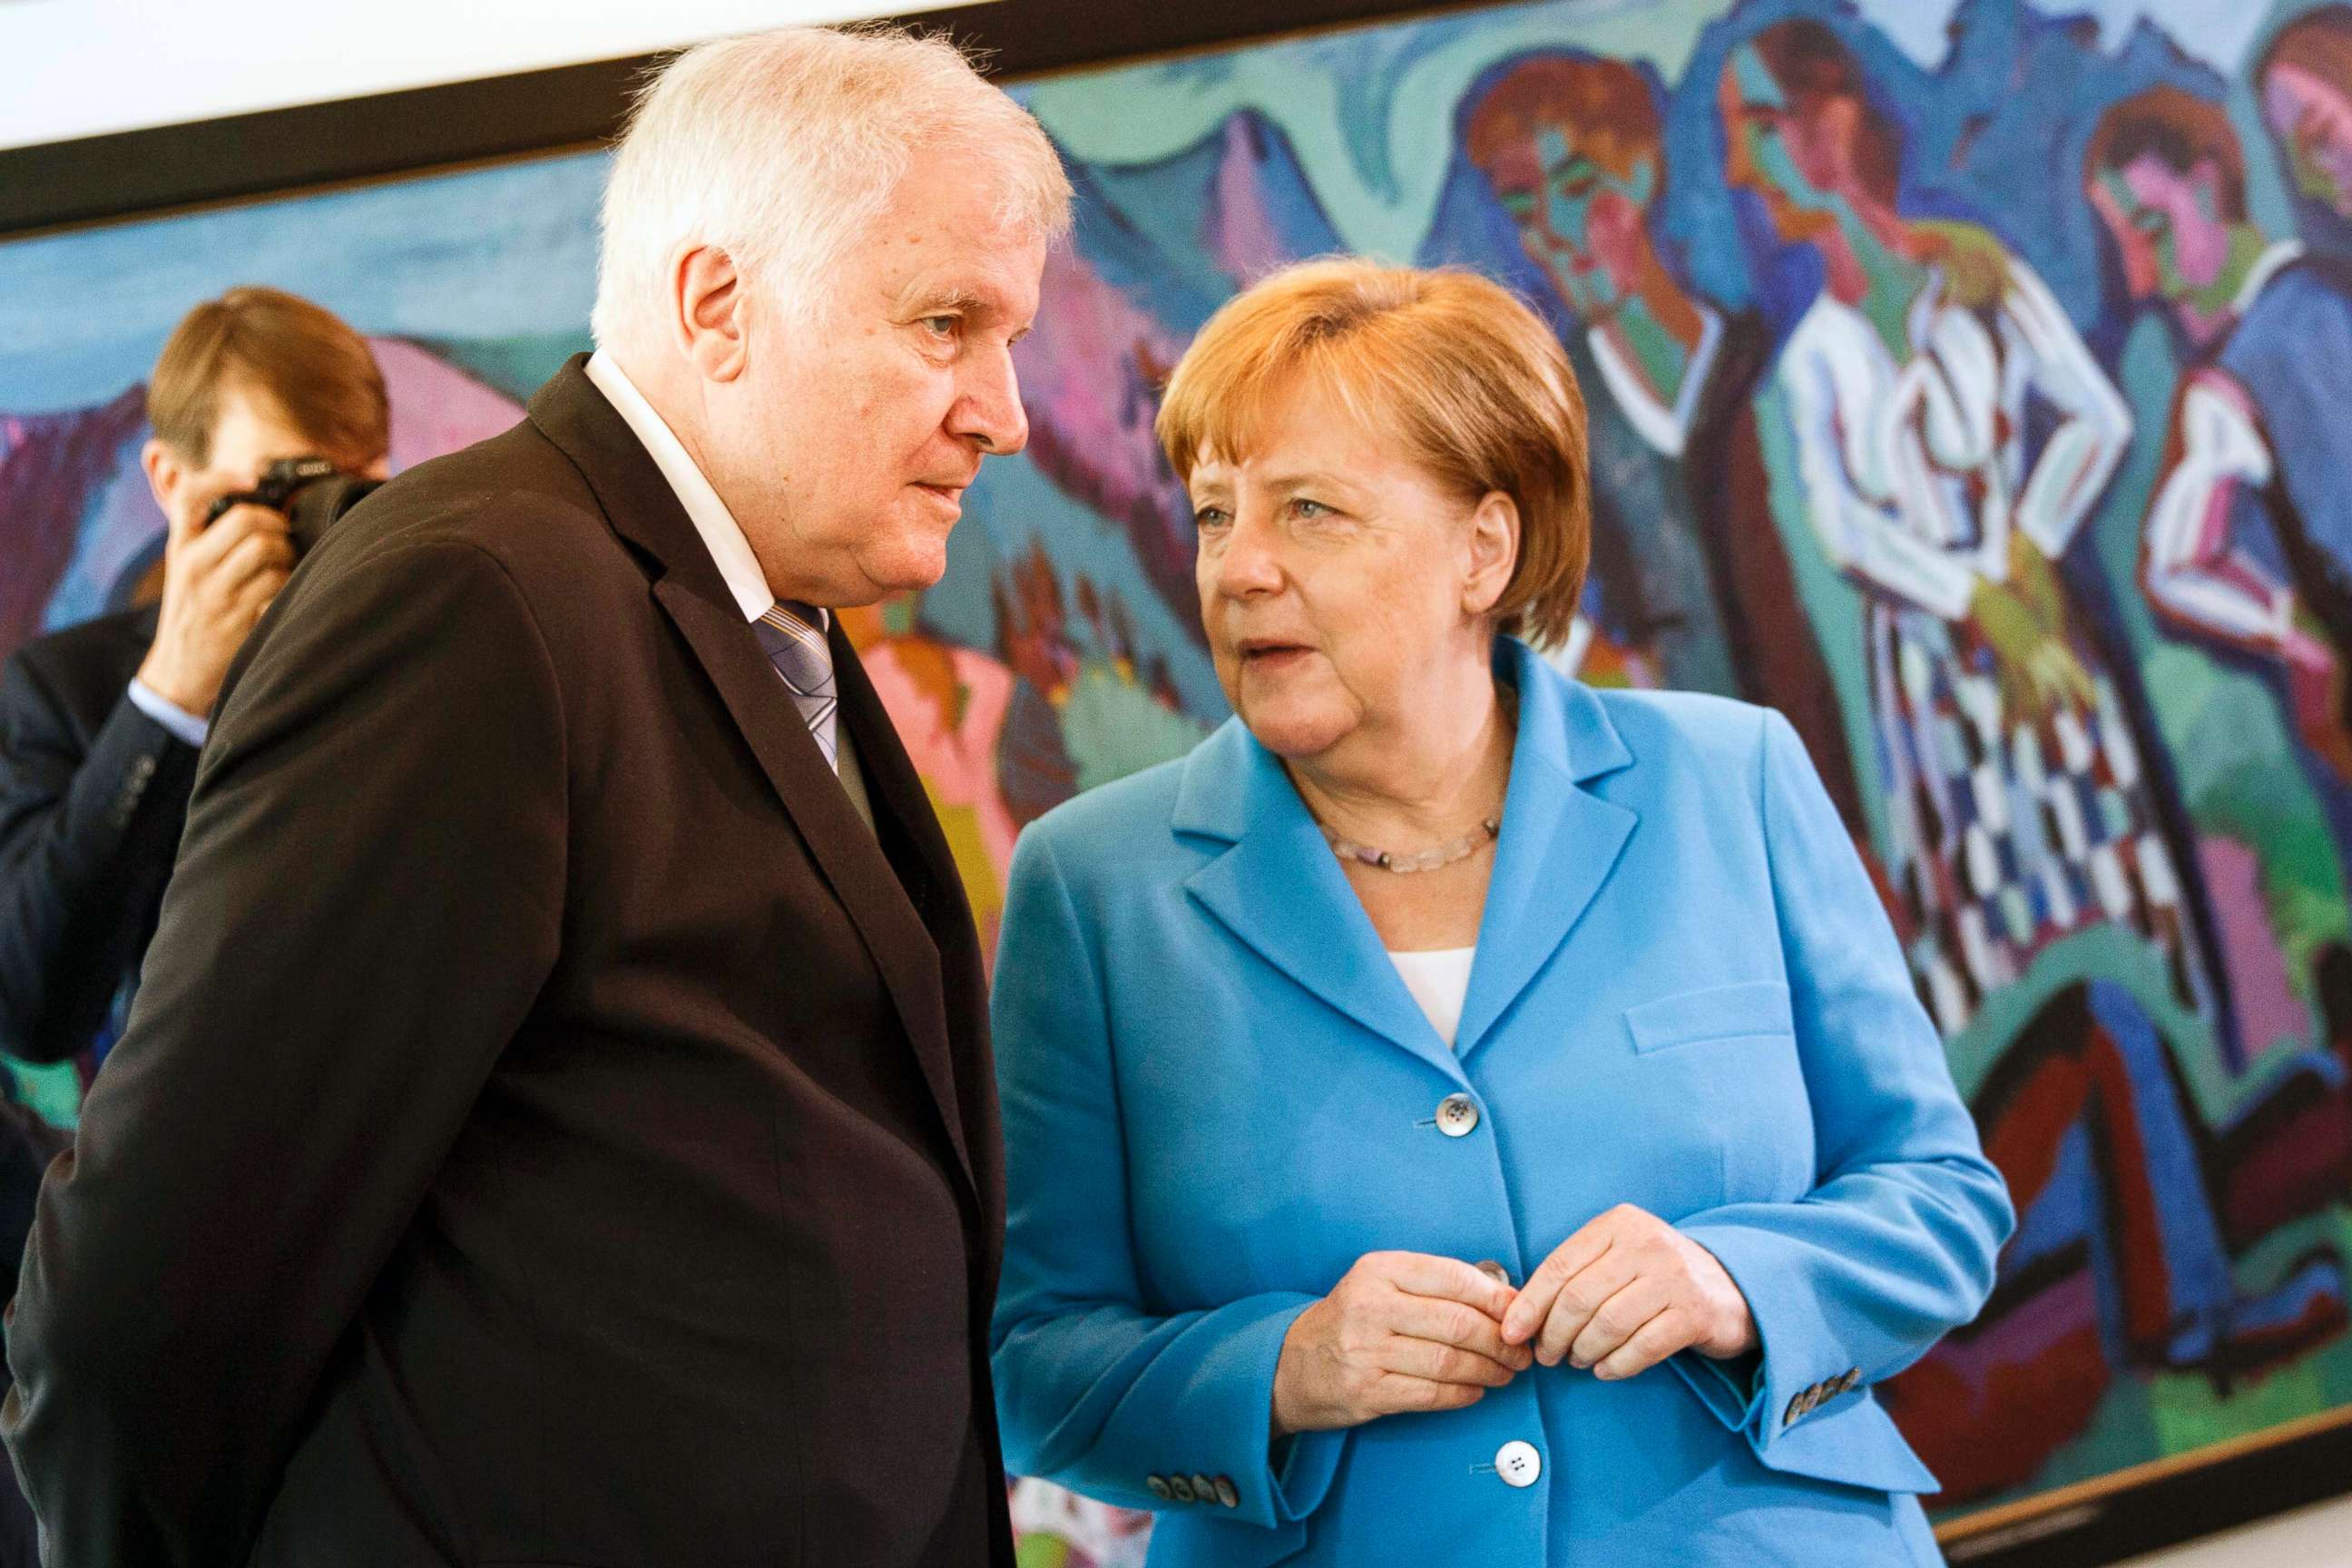 PHOTO: German Chancellor Angela Merkel speaks to German Interior Minister Horst Seehofer after the arrival for the weekly government cabinet meeting, June 13, 2018, in Berlin.